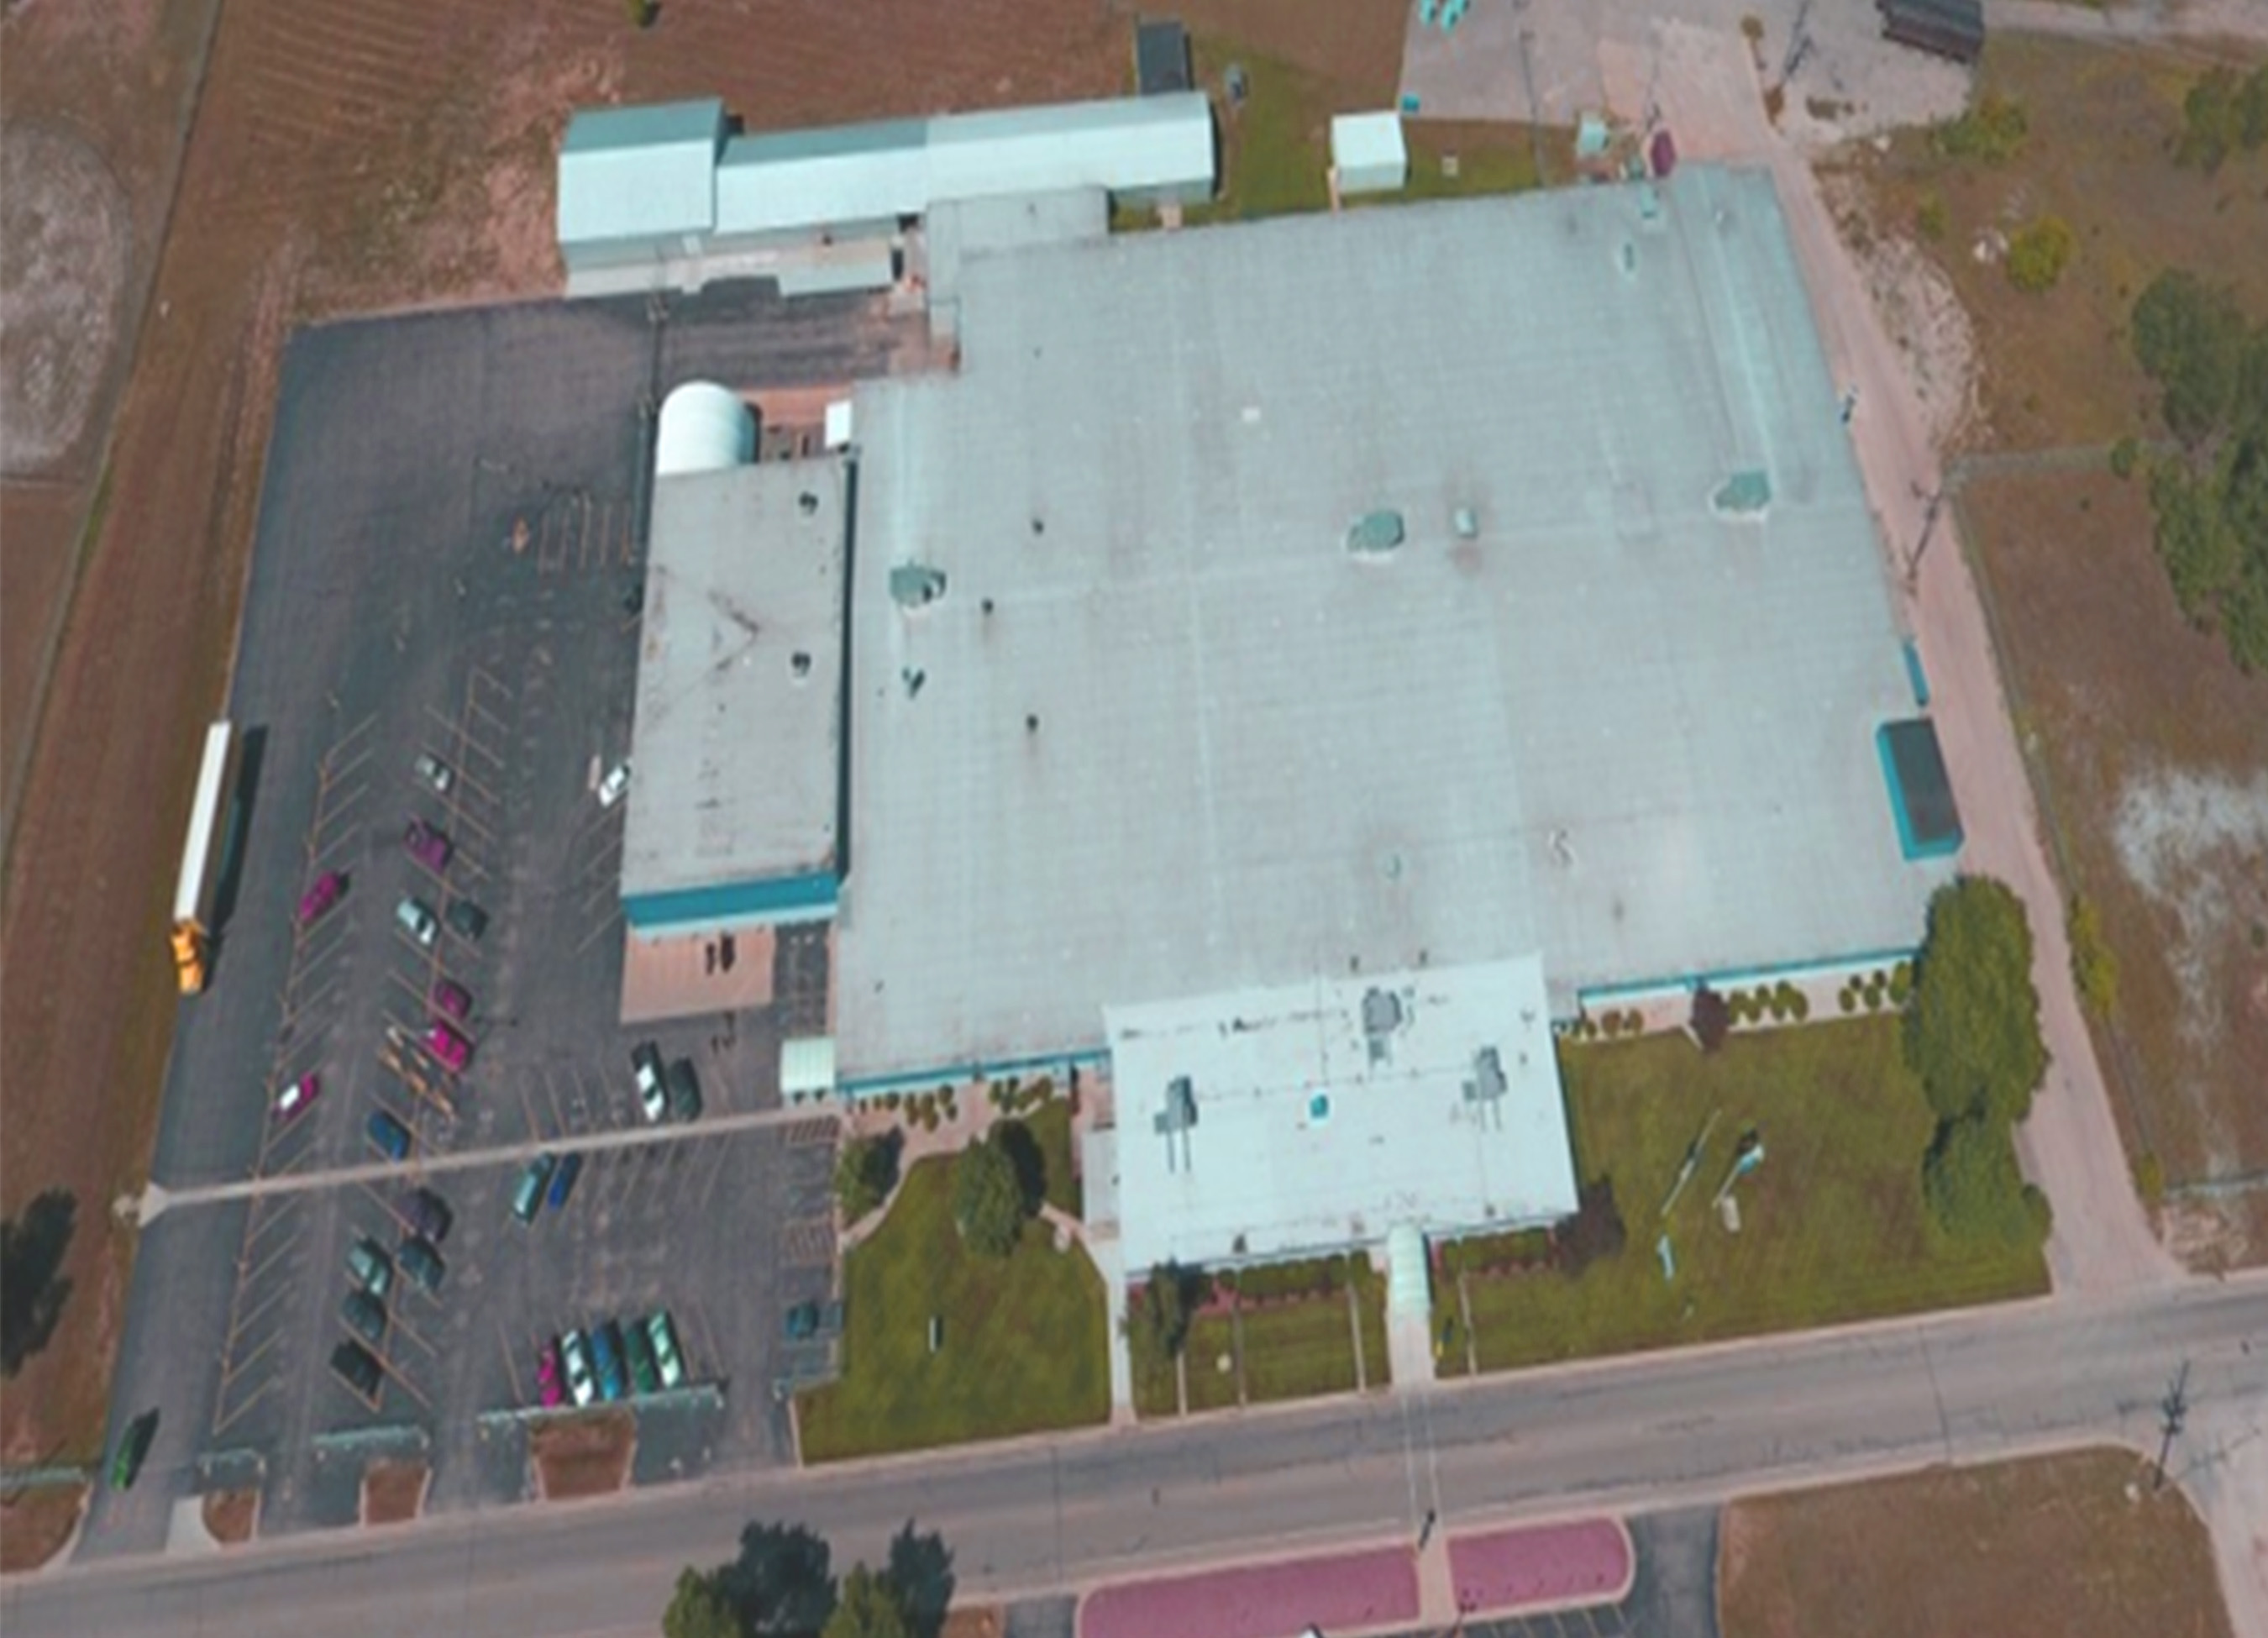 Birds-eye view of manufacturing facility